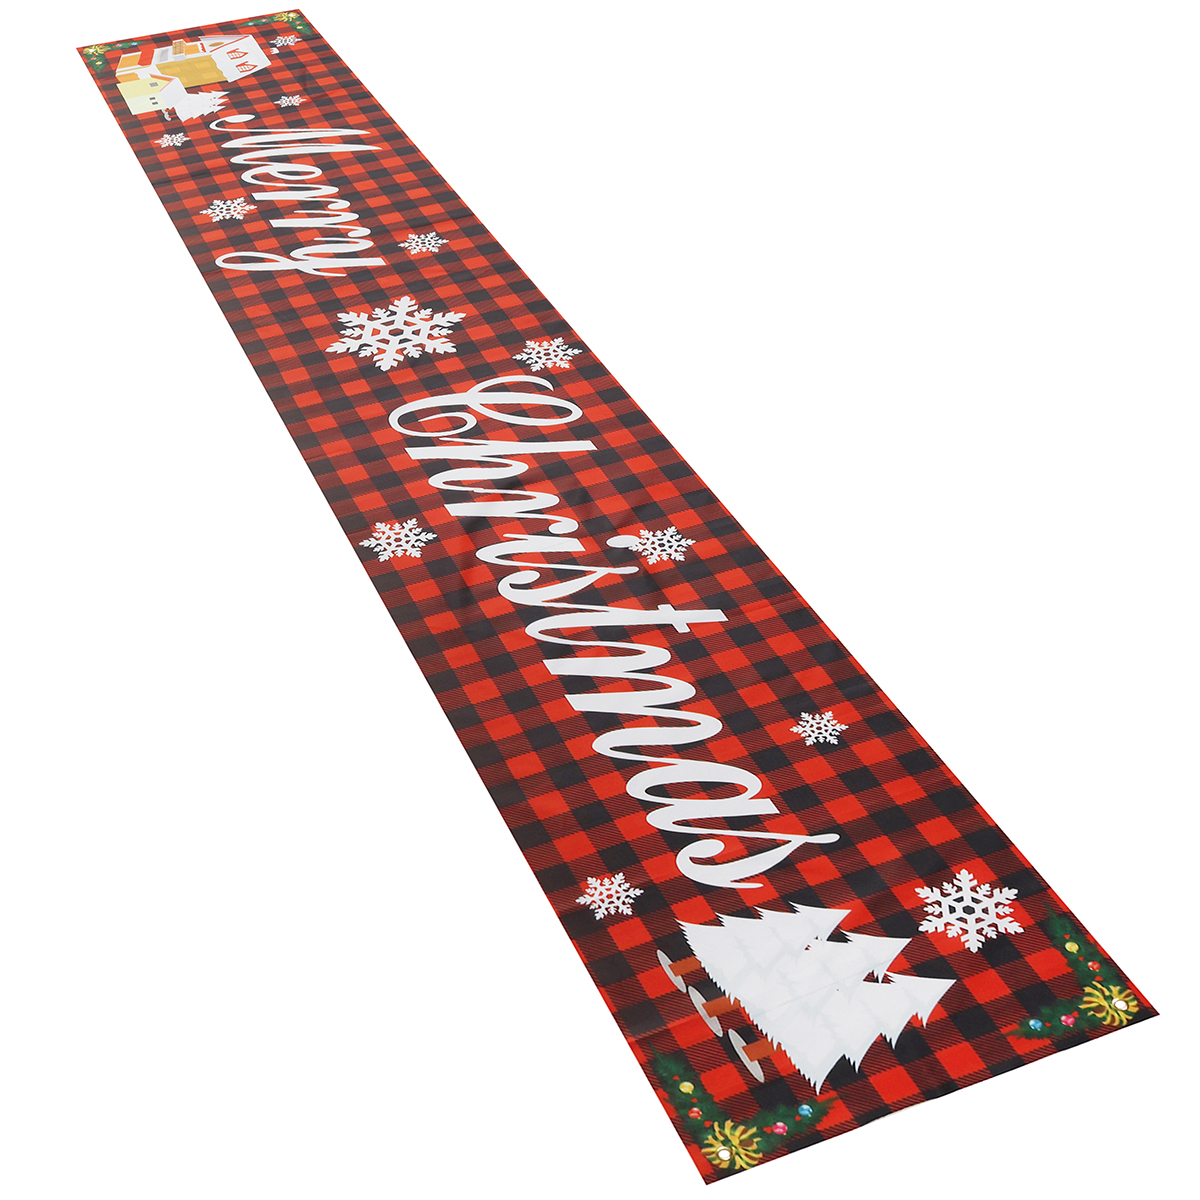 3M-Merry-Christmas-Outdoor-Banner-Oxford-Large-Hanging-Bunting-Xmas-Door-Wall-Decoration-Photography-1764541-9